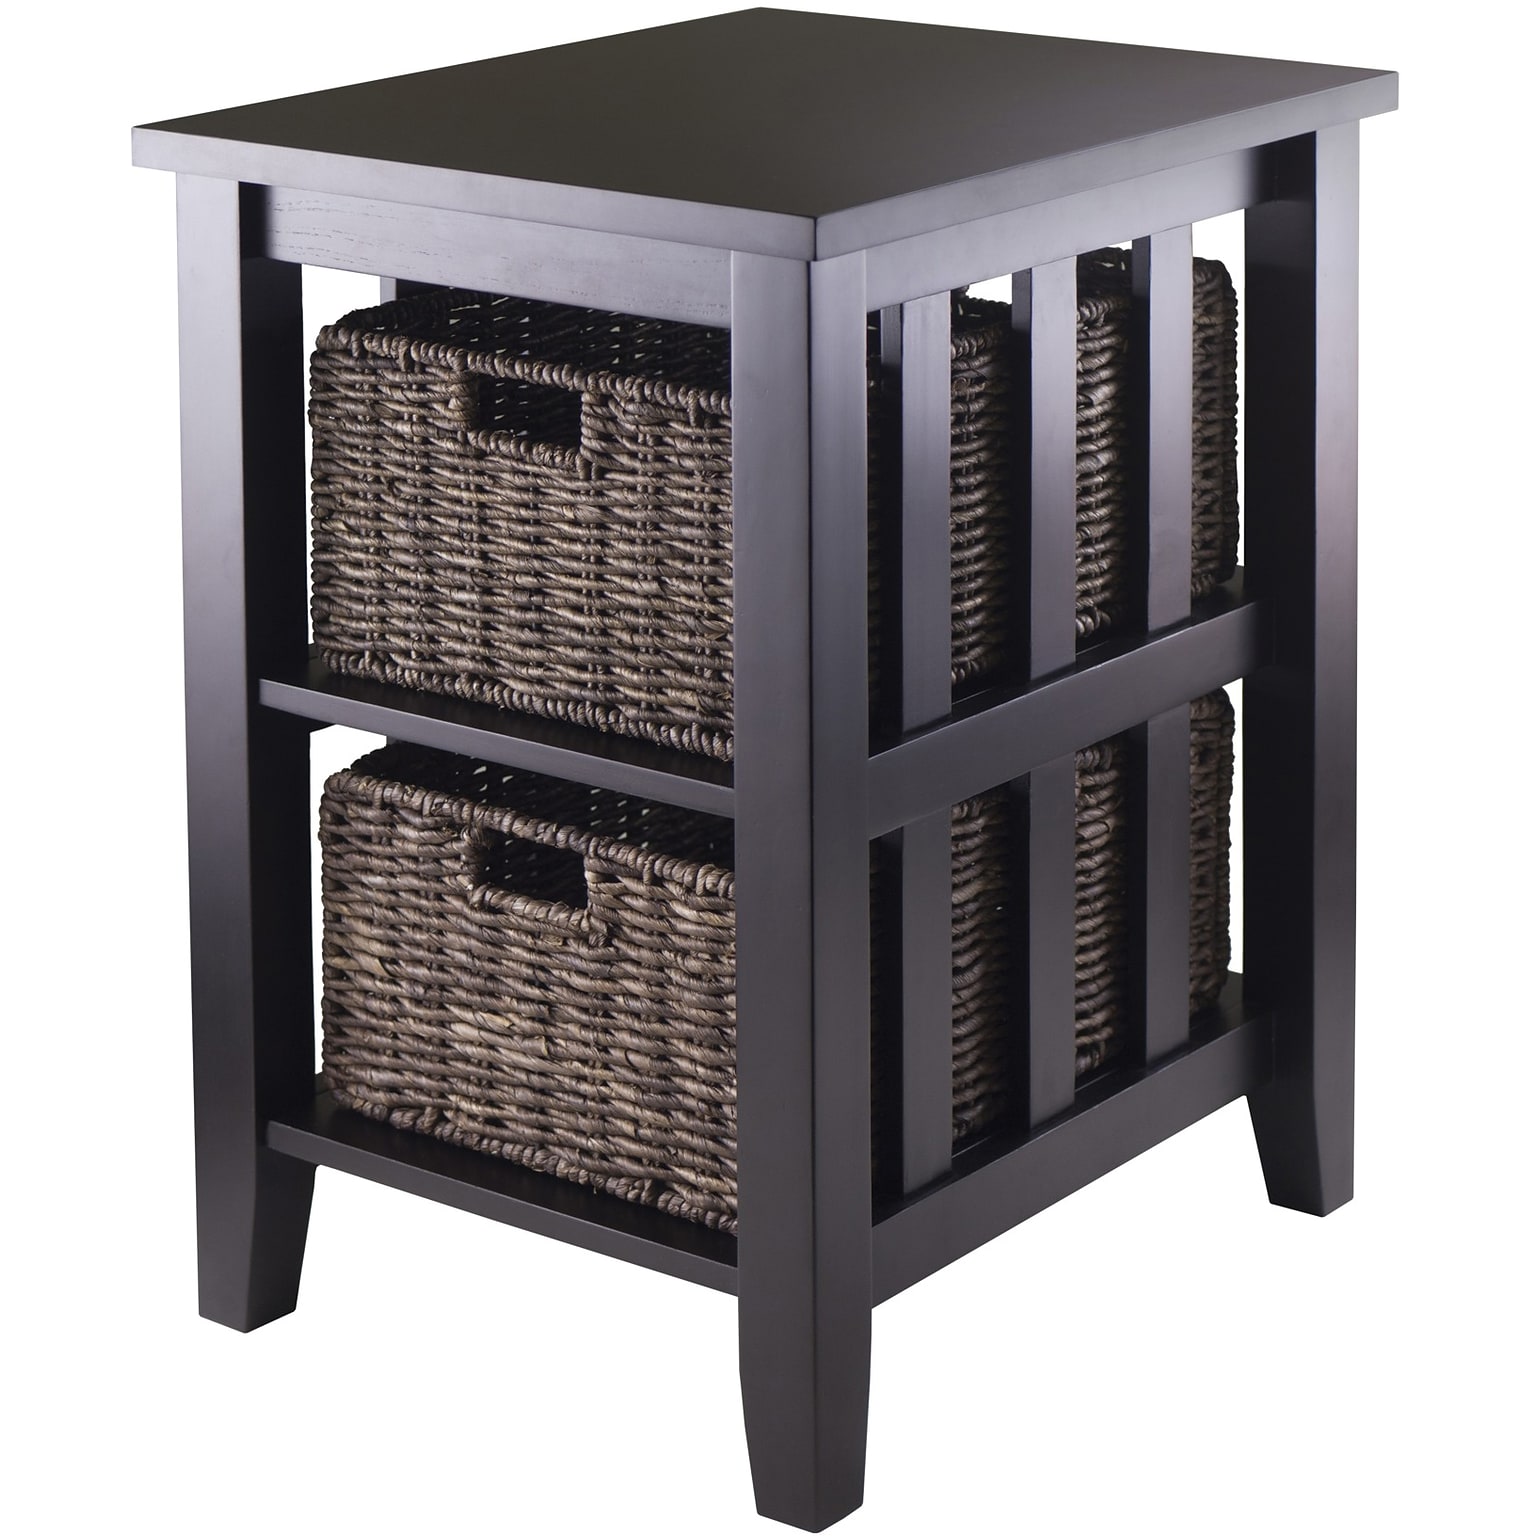 Winsome Morris 25.04 x 20.08 x 16.54 Wood Side Table With 2 Foldable Baskets, Espresso